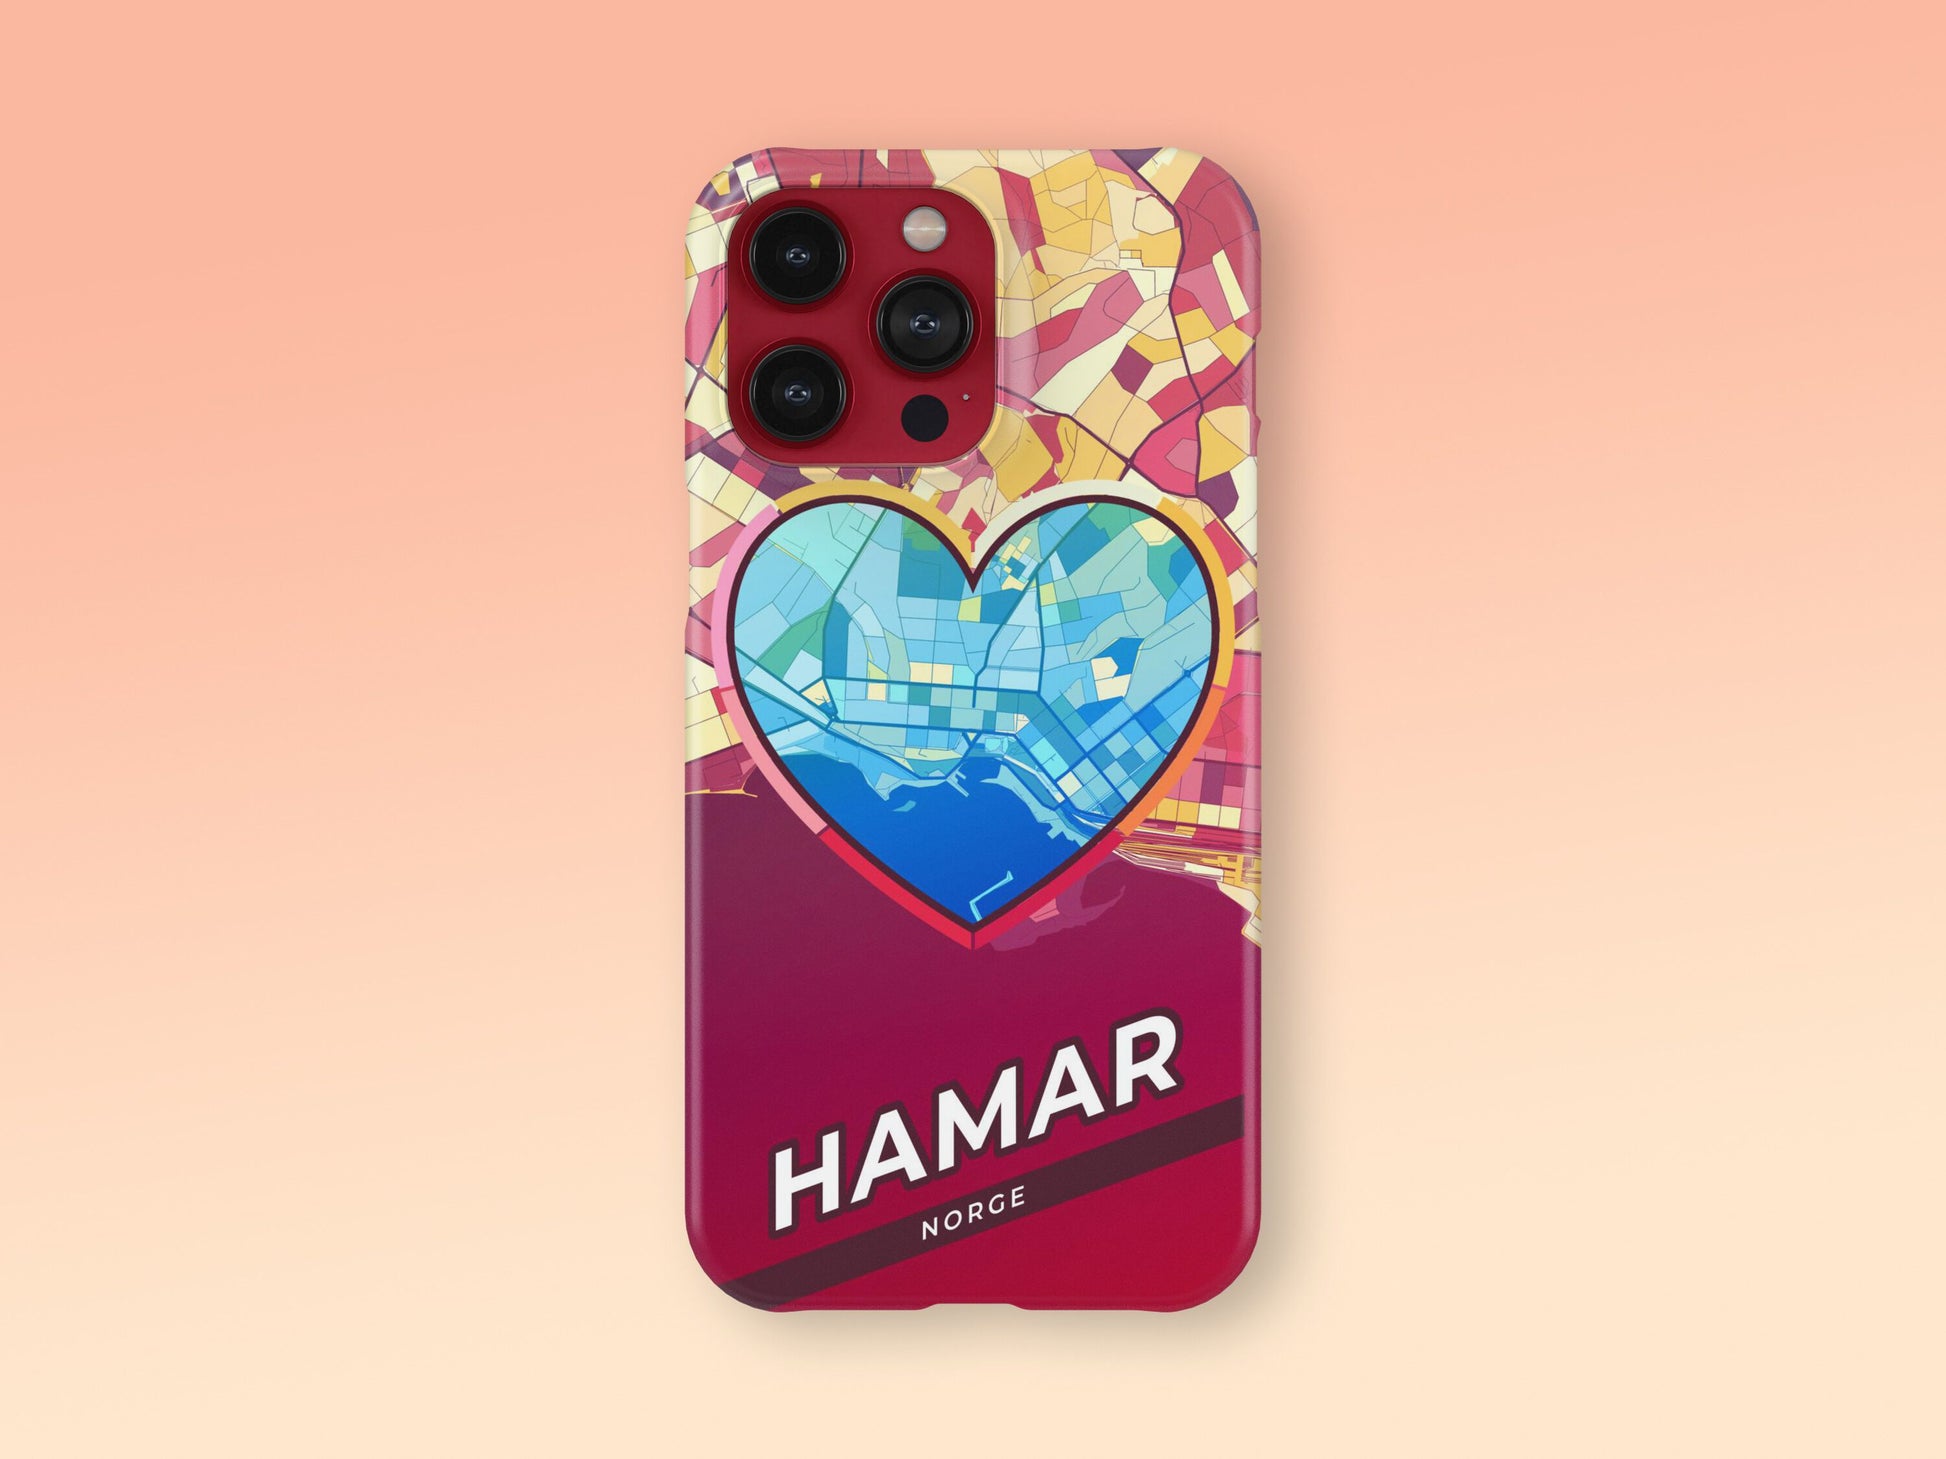 Hamar Norway slim phone case with colorful icon. Birthday, wedding or housewarming gift. Couple match cases. 2